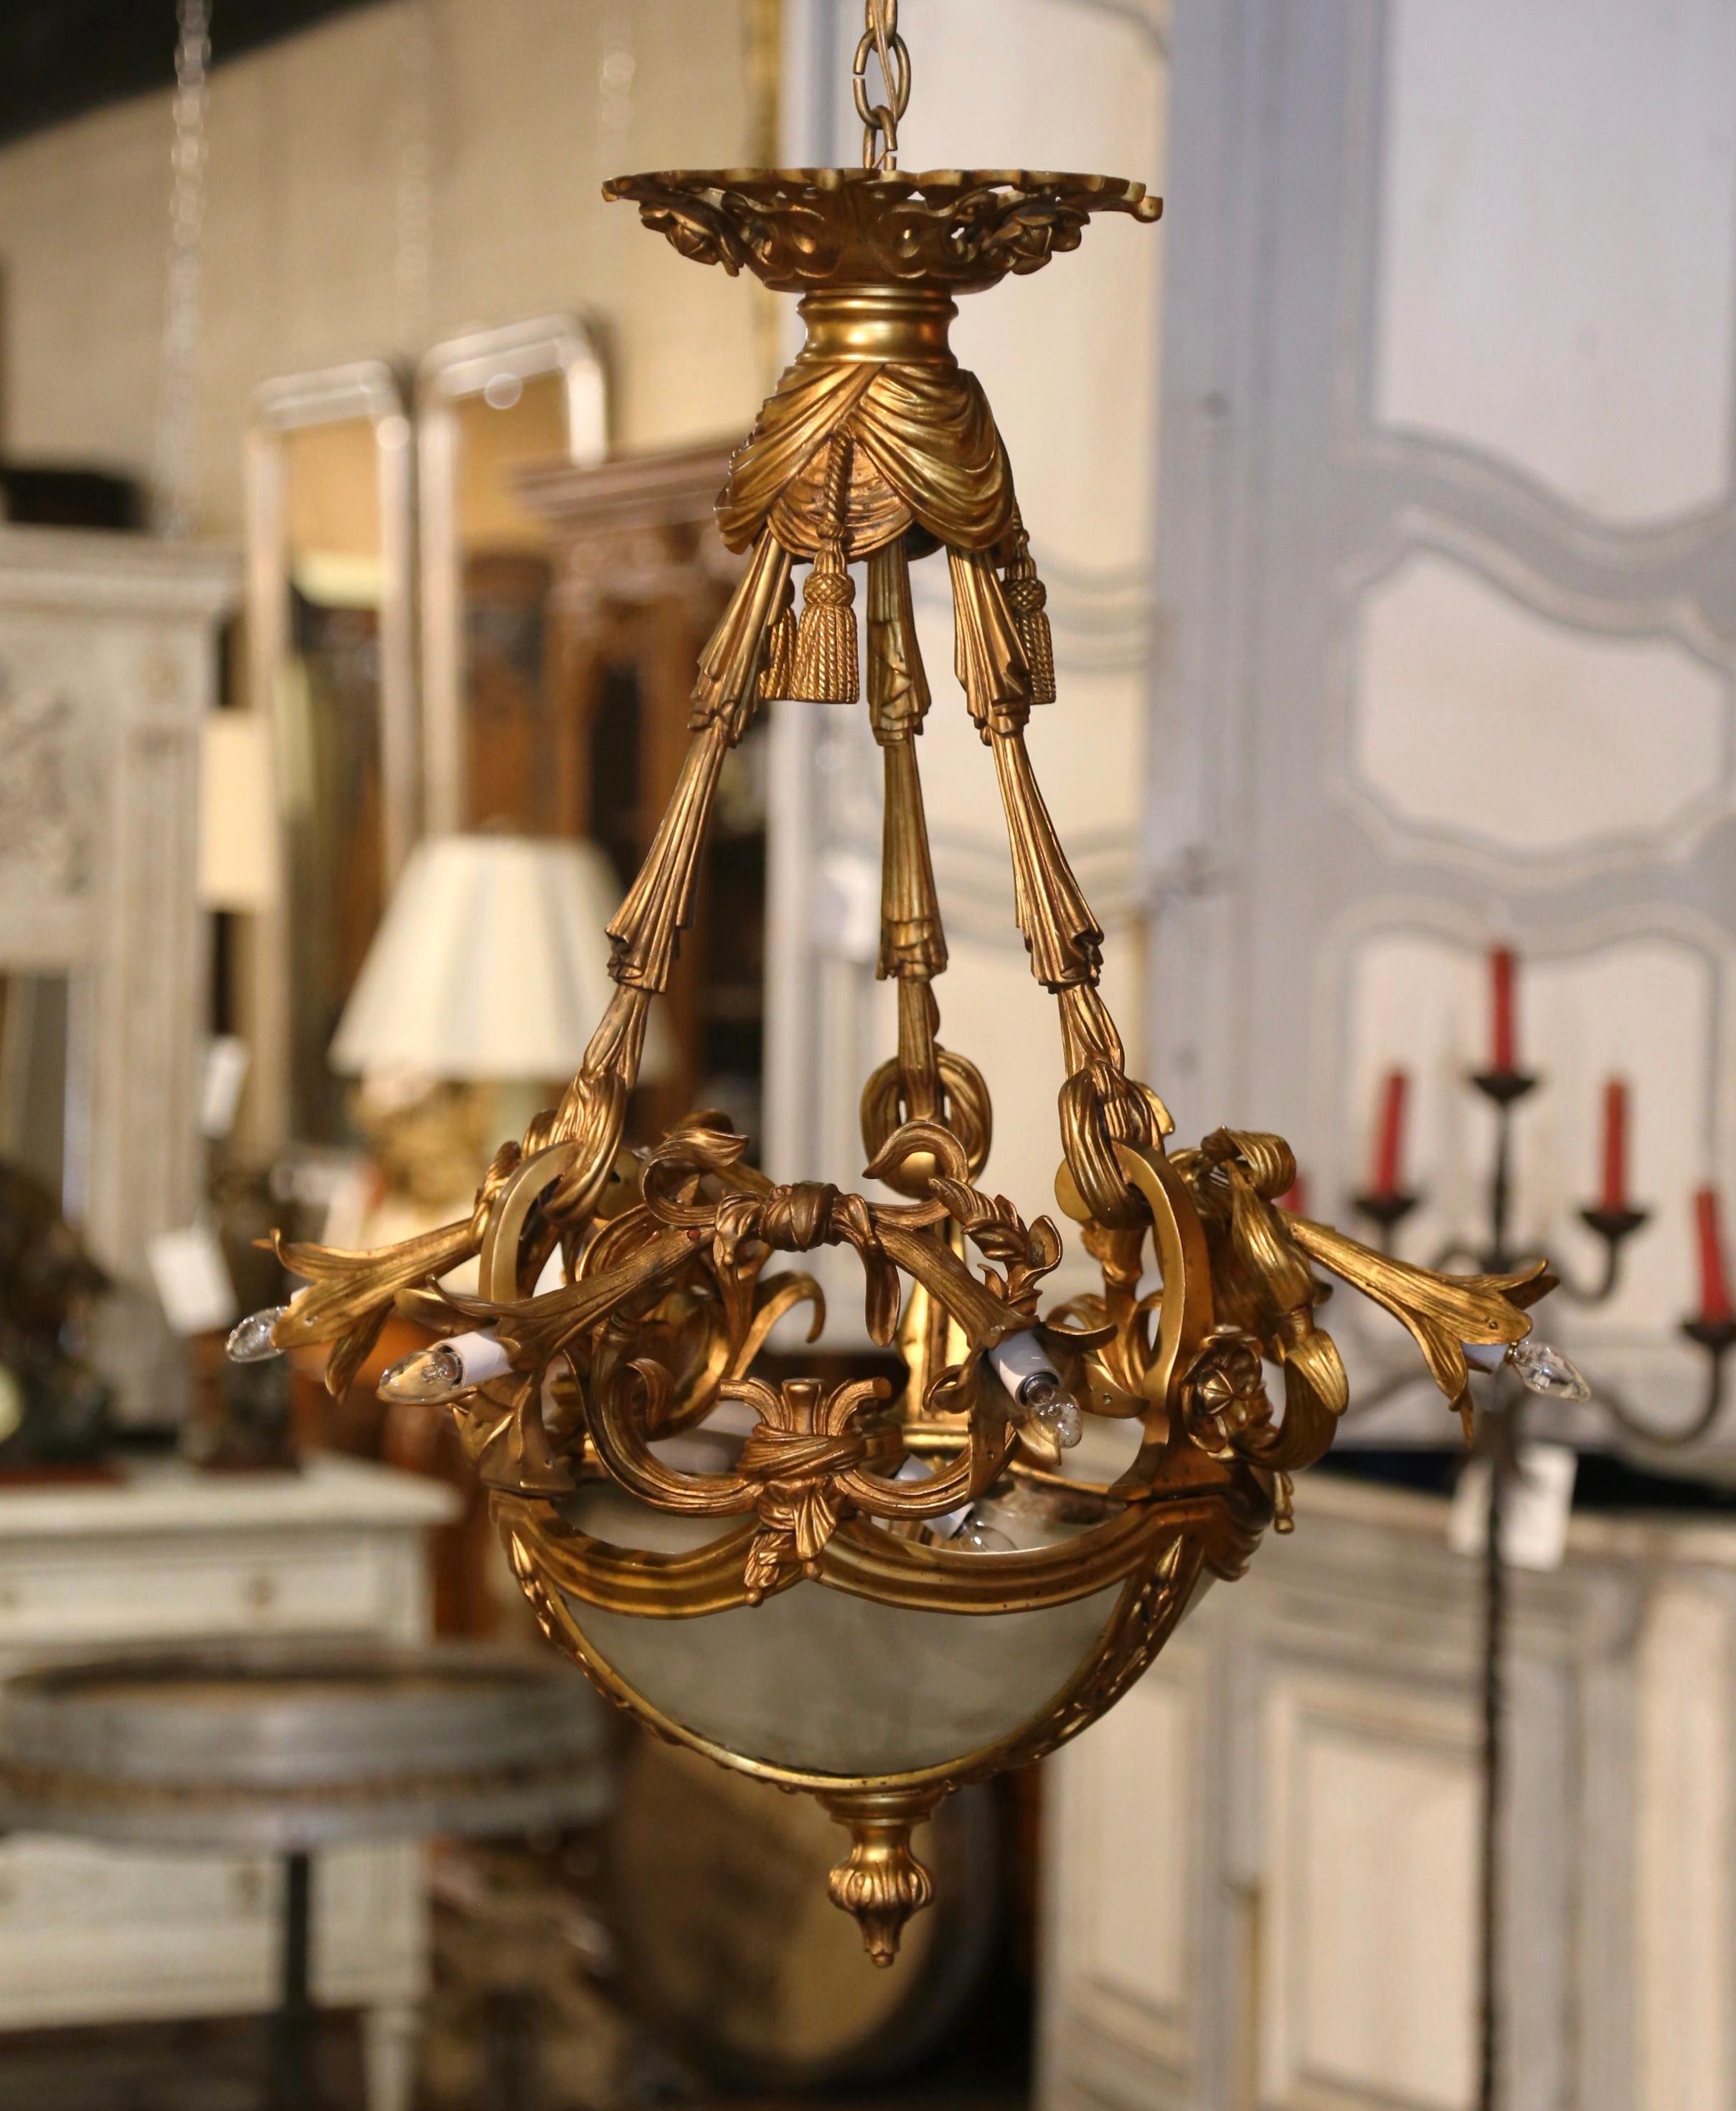 Decorate an entry, a bedroom or a powder room with this elegant antique gilt bronze chandelier. Crafted in France circa 1880, the fixture is built of solid bronze with rope and swag motifs, and embellished with frosted glass at the base. The